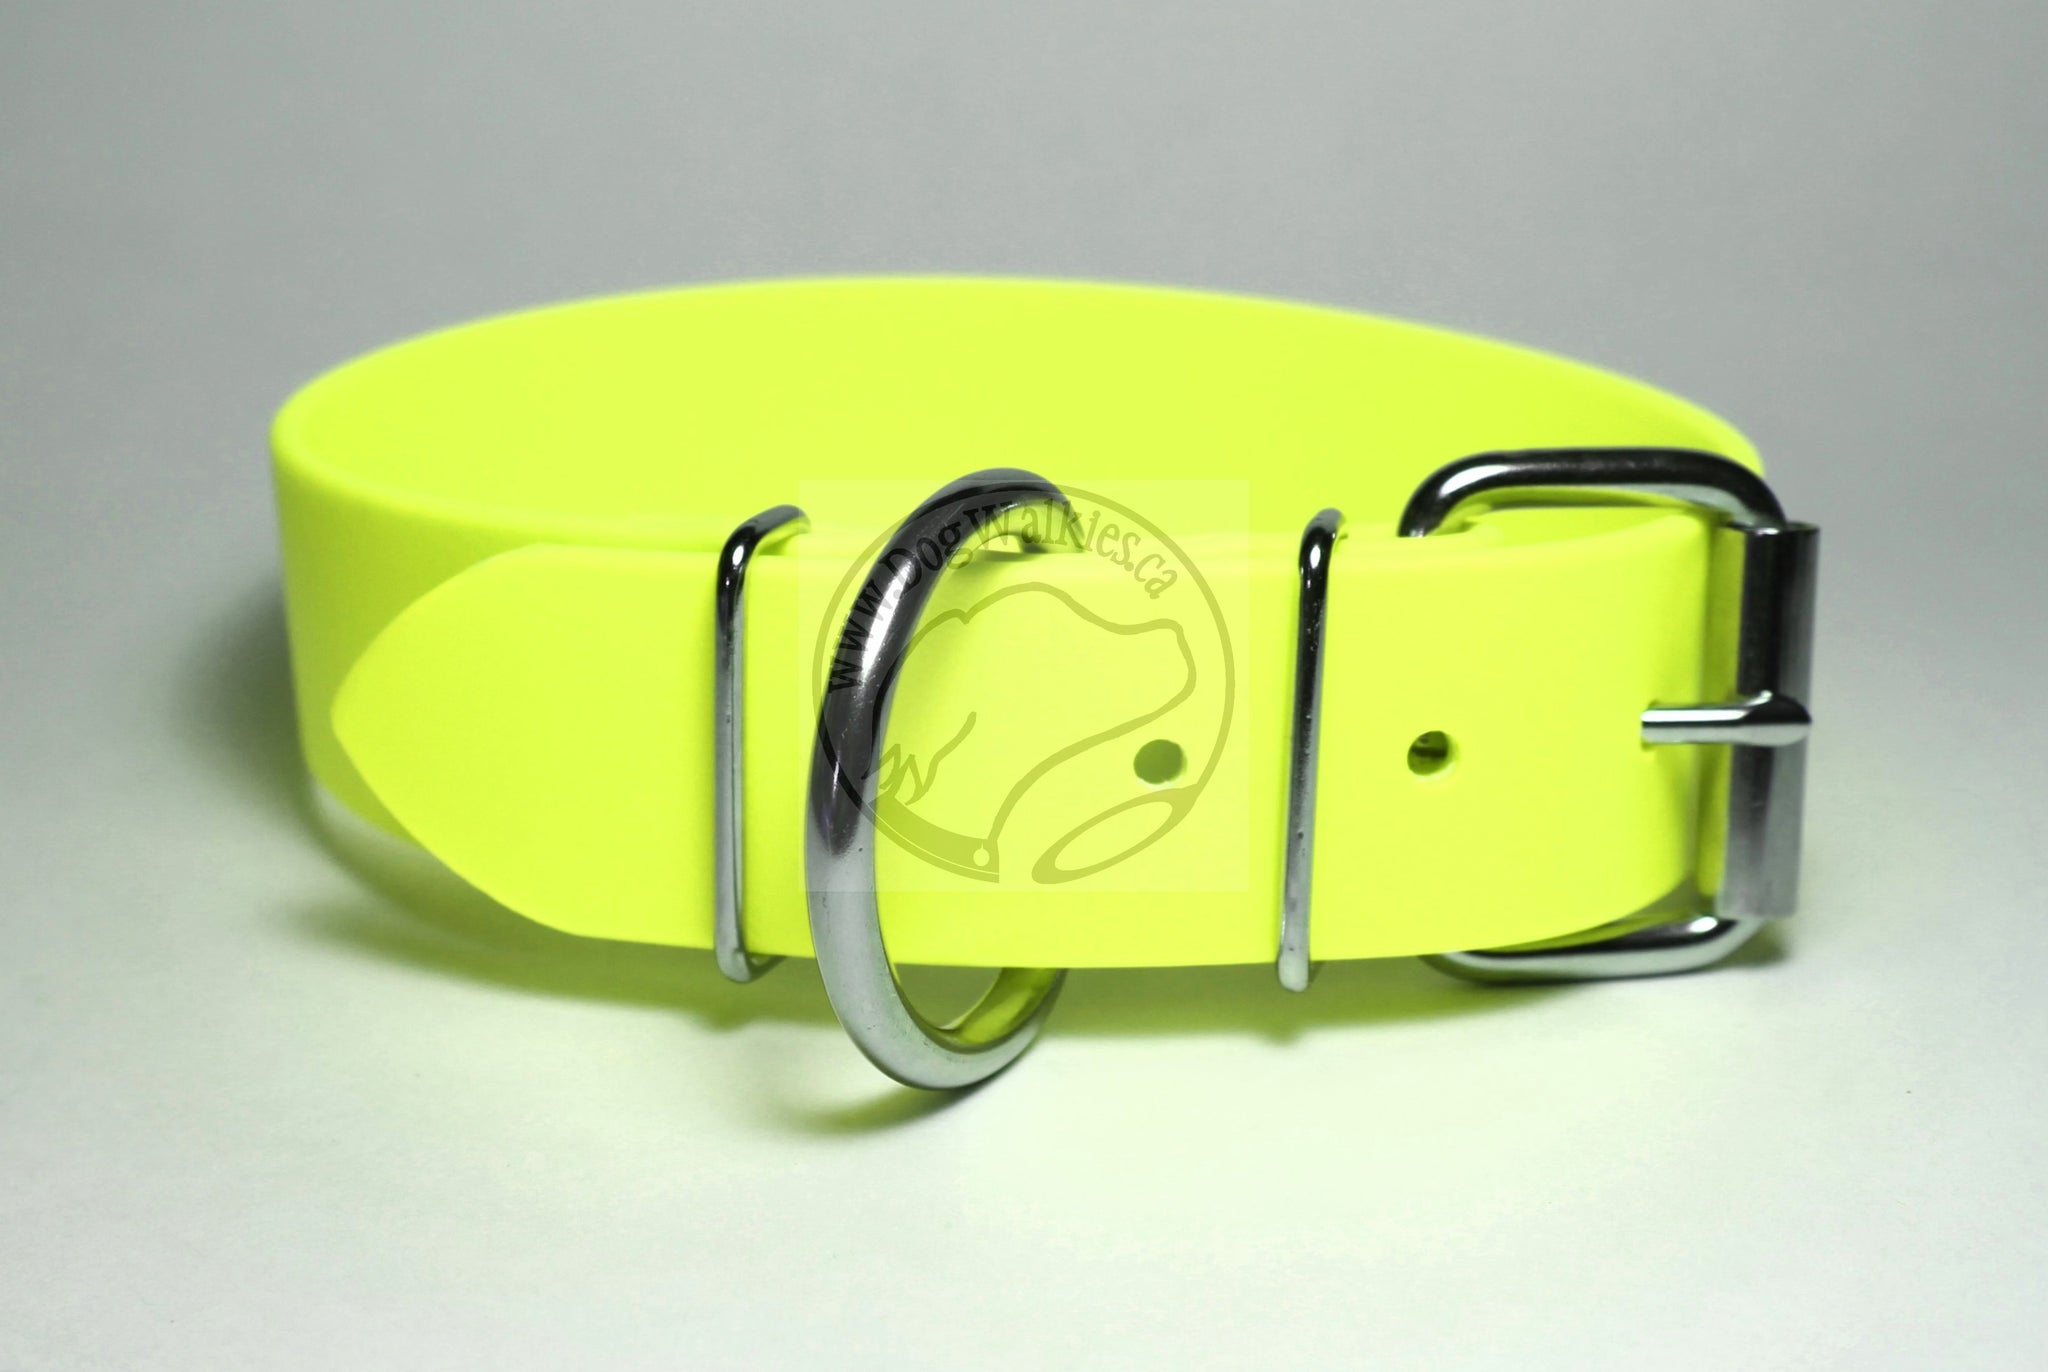 Neon Yellow Biothane Dog Collar - Extra Wide - 1.5 inch (38mm) wide